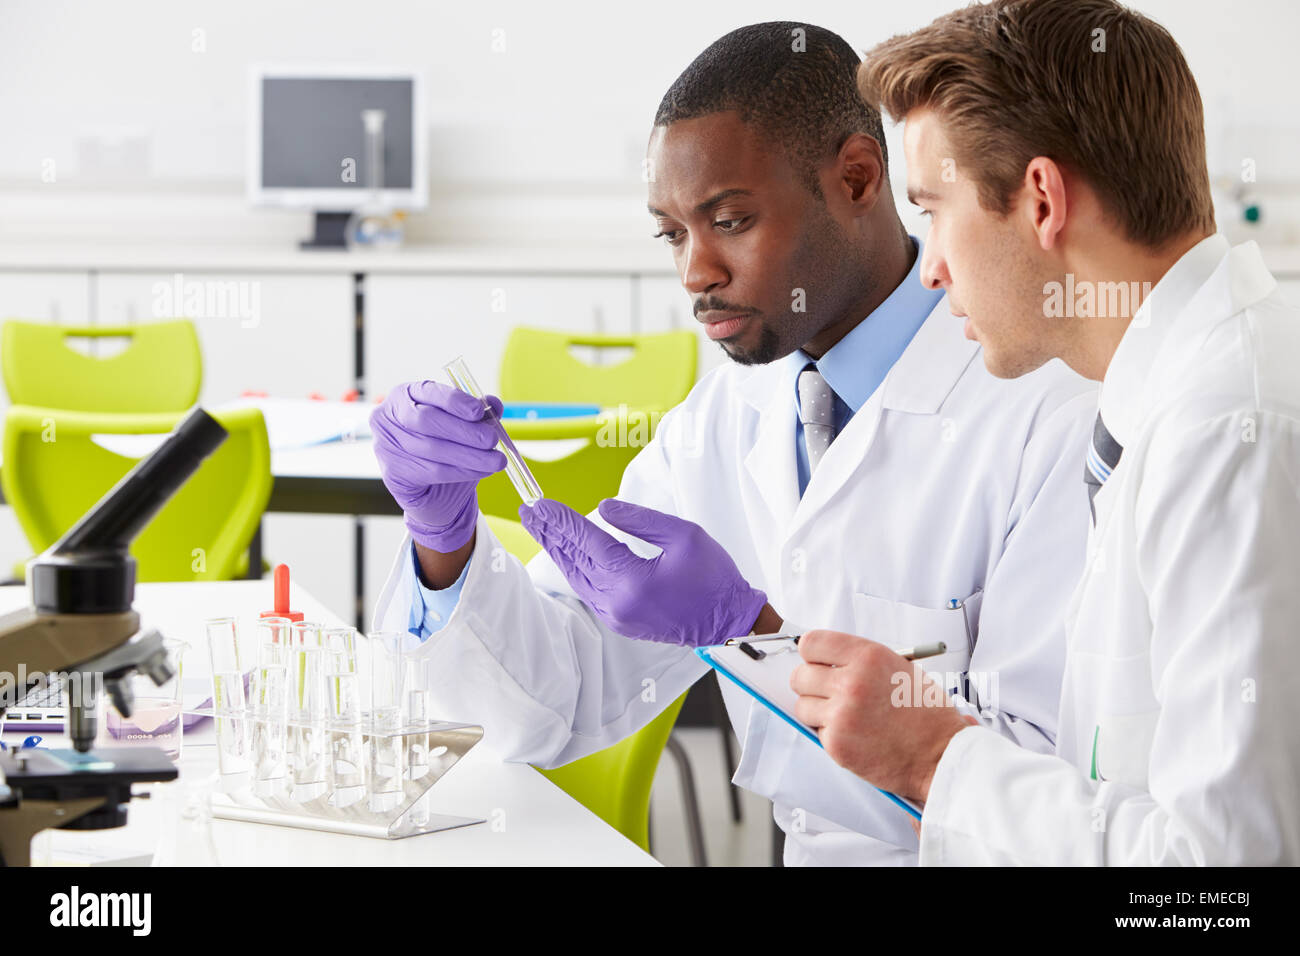 Two Technicians Working In Laboratory Stock Photo